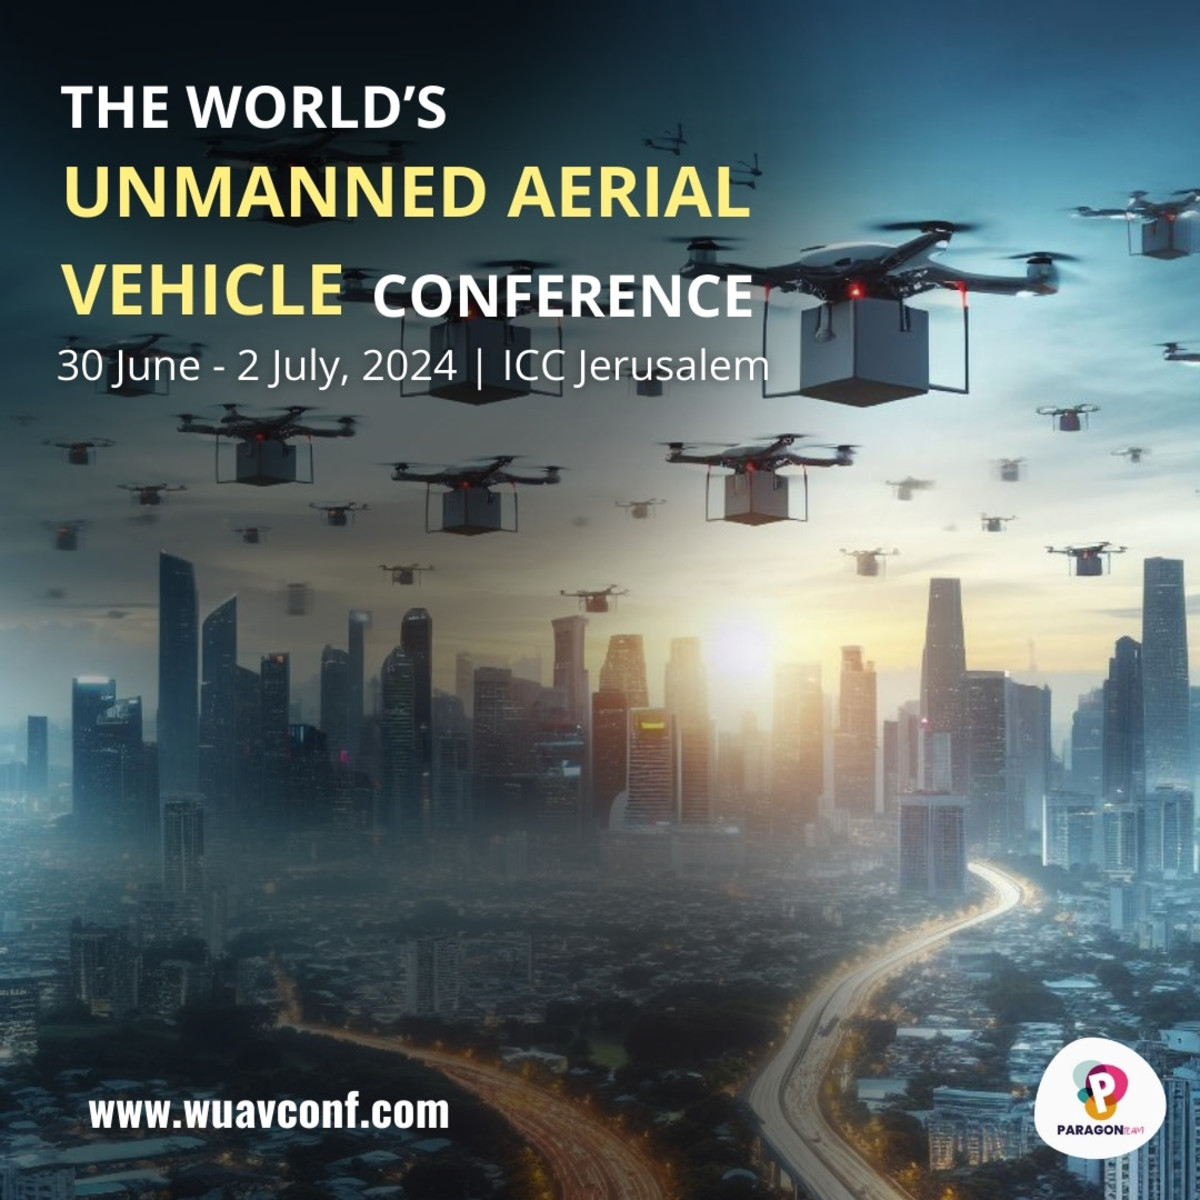 The International Conference on Unmanned Aerial Vehicles commences in Jerusalem on June 30